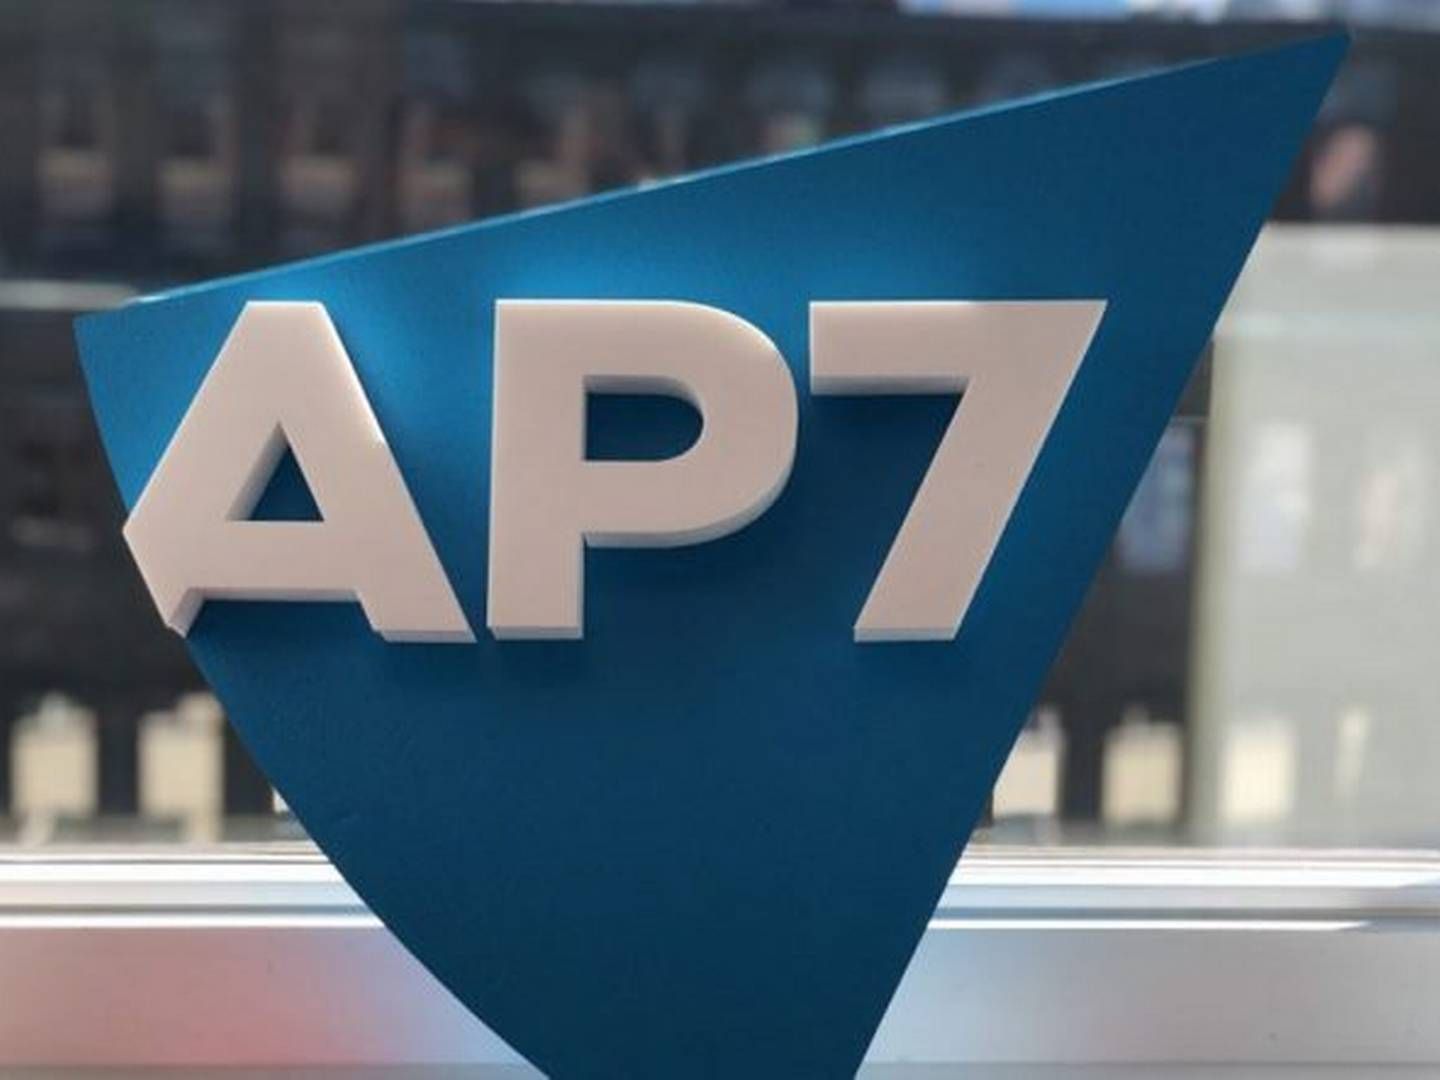 AP7 will vote against board members and financial statements if companies are too slow on the green transition. | Foto: Ap7/pr